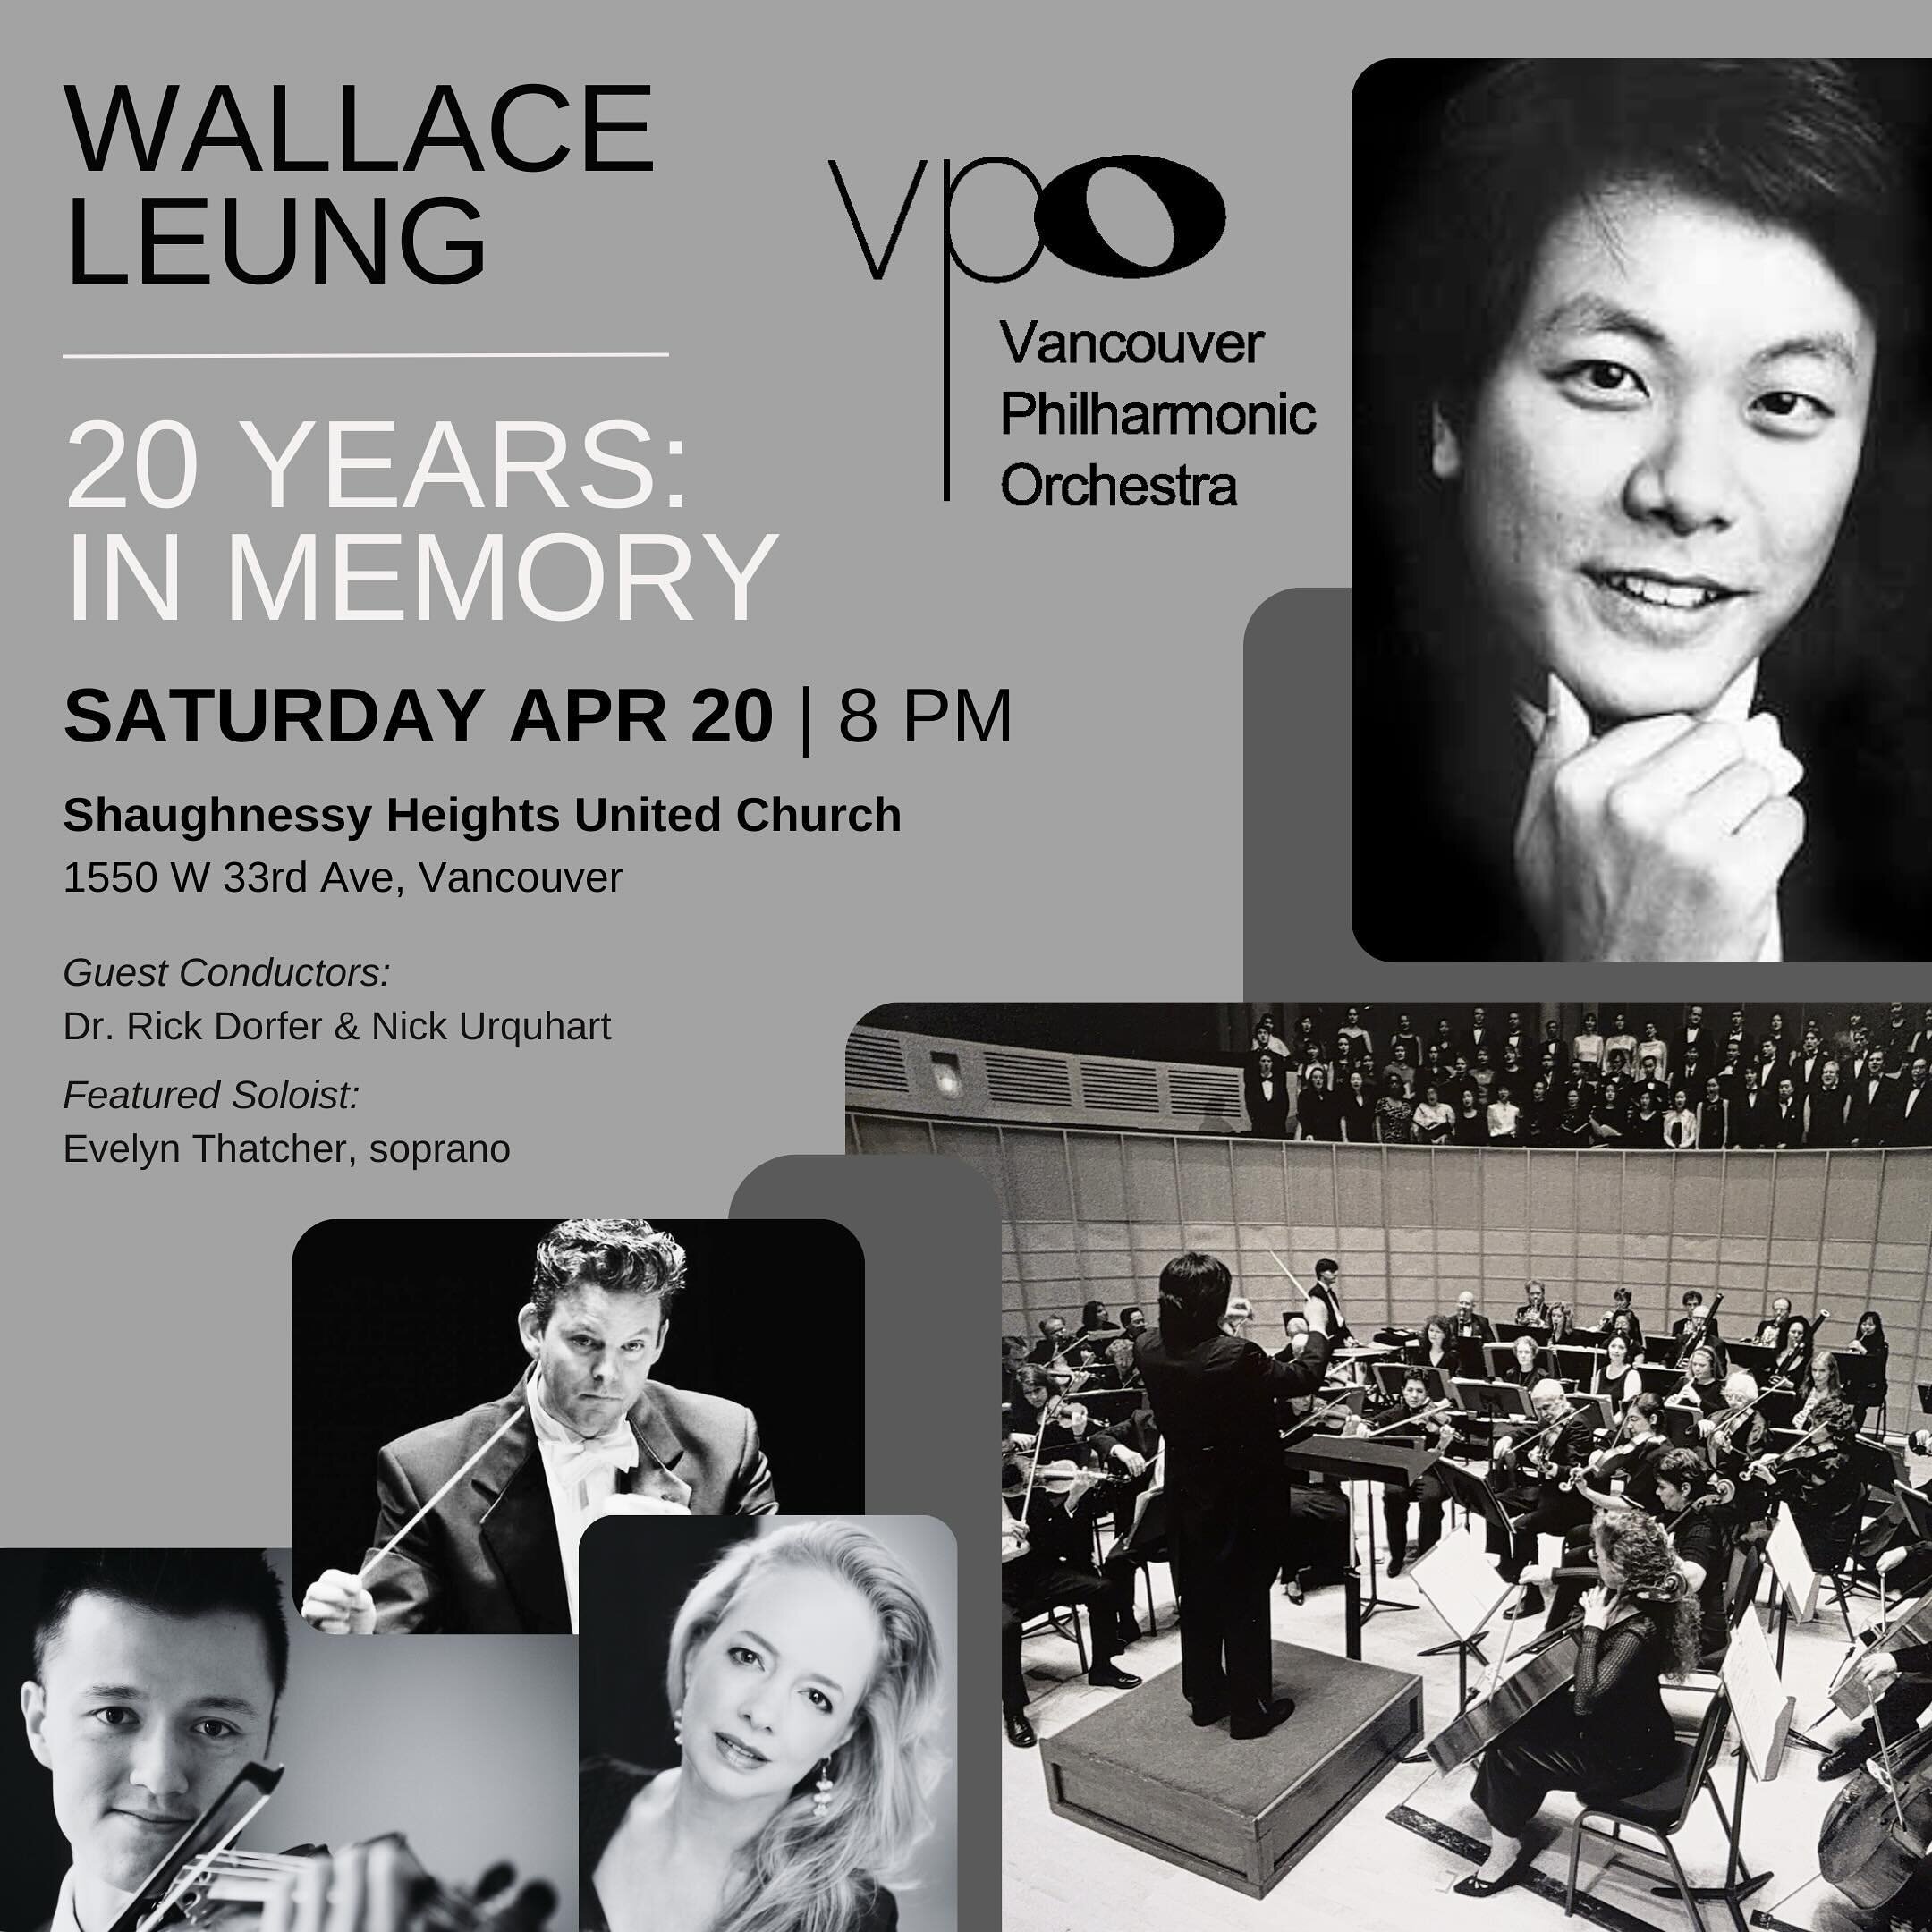 Join us on Saturday April 20th at 8:00pm for a special concert honoring our former Music Director, Wallace Leung. It has been just over 20 years since Wallace tragically passed away. Wallace was much loved by the orchestra members, and our Assistant 